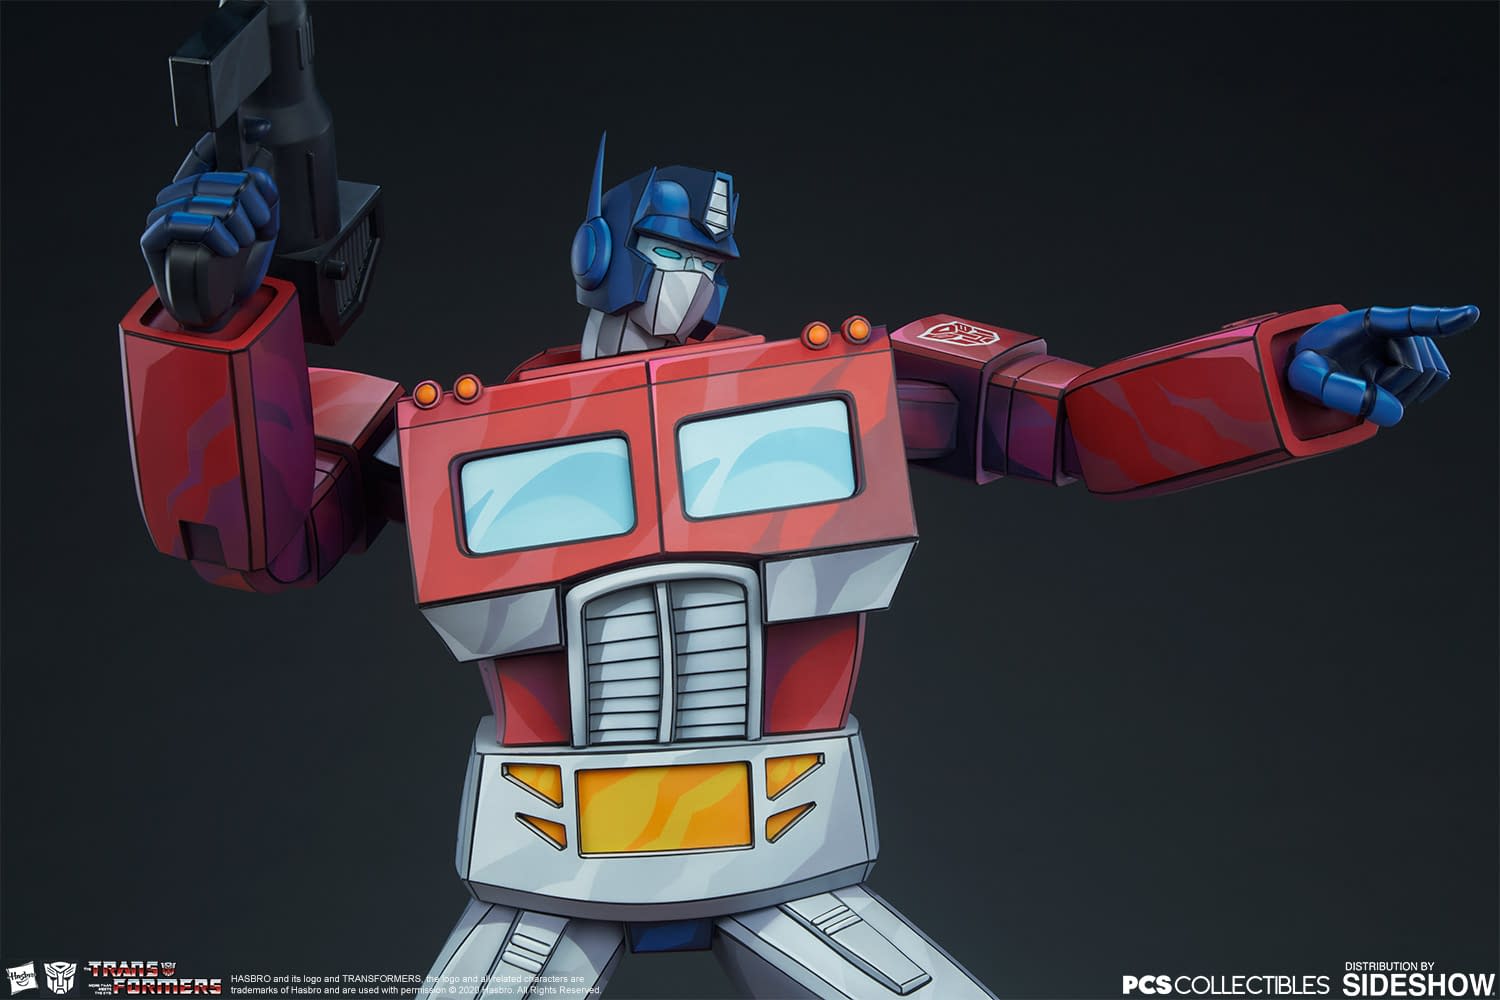 Optimus Prime Goes Old School with New PCS and Sideshow Statue